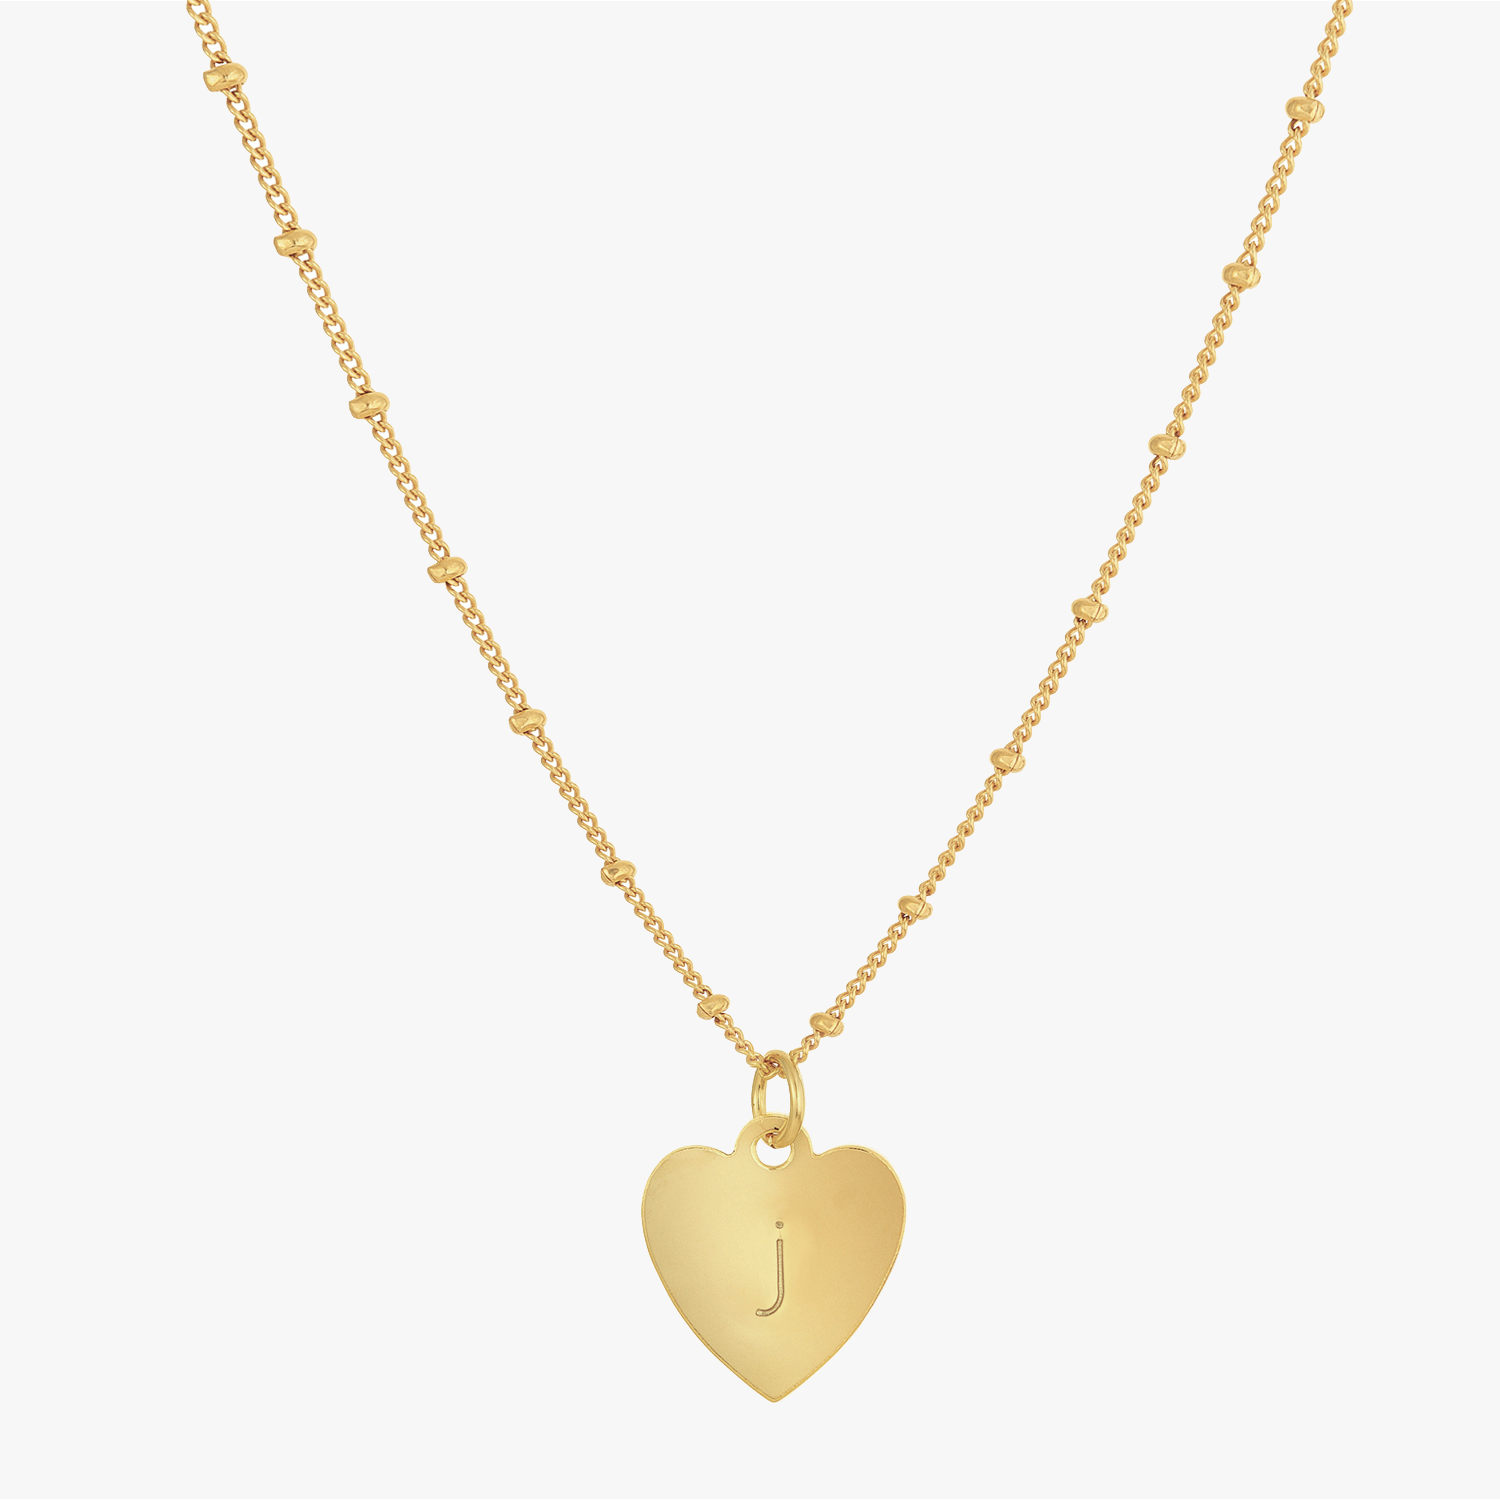 Personalized Heart Satellite Necklace